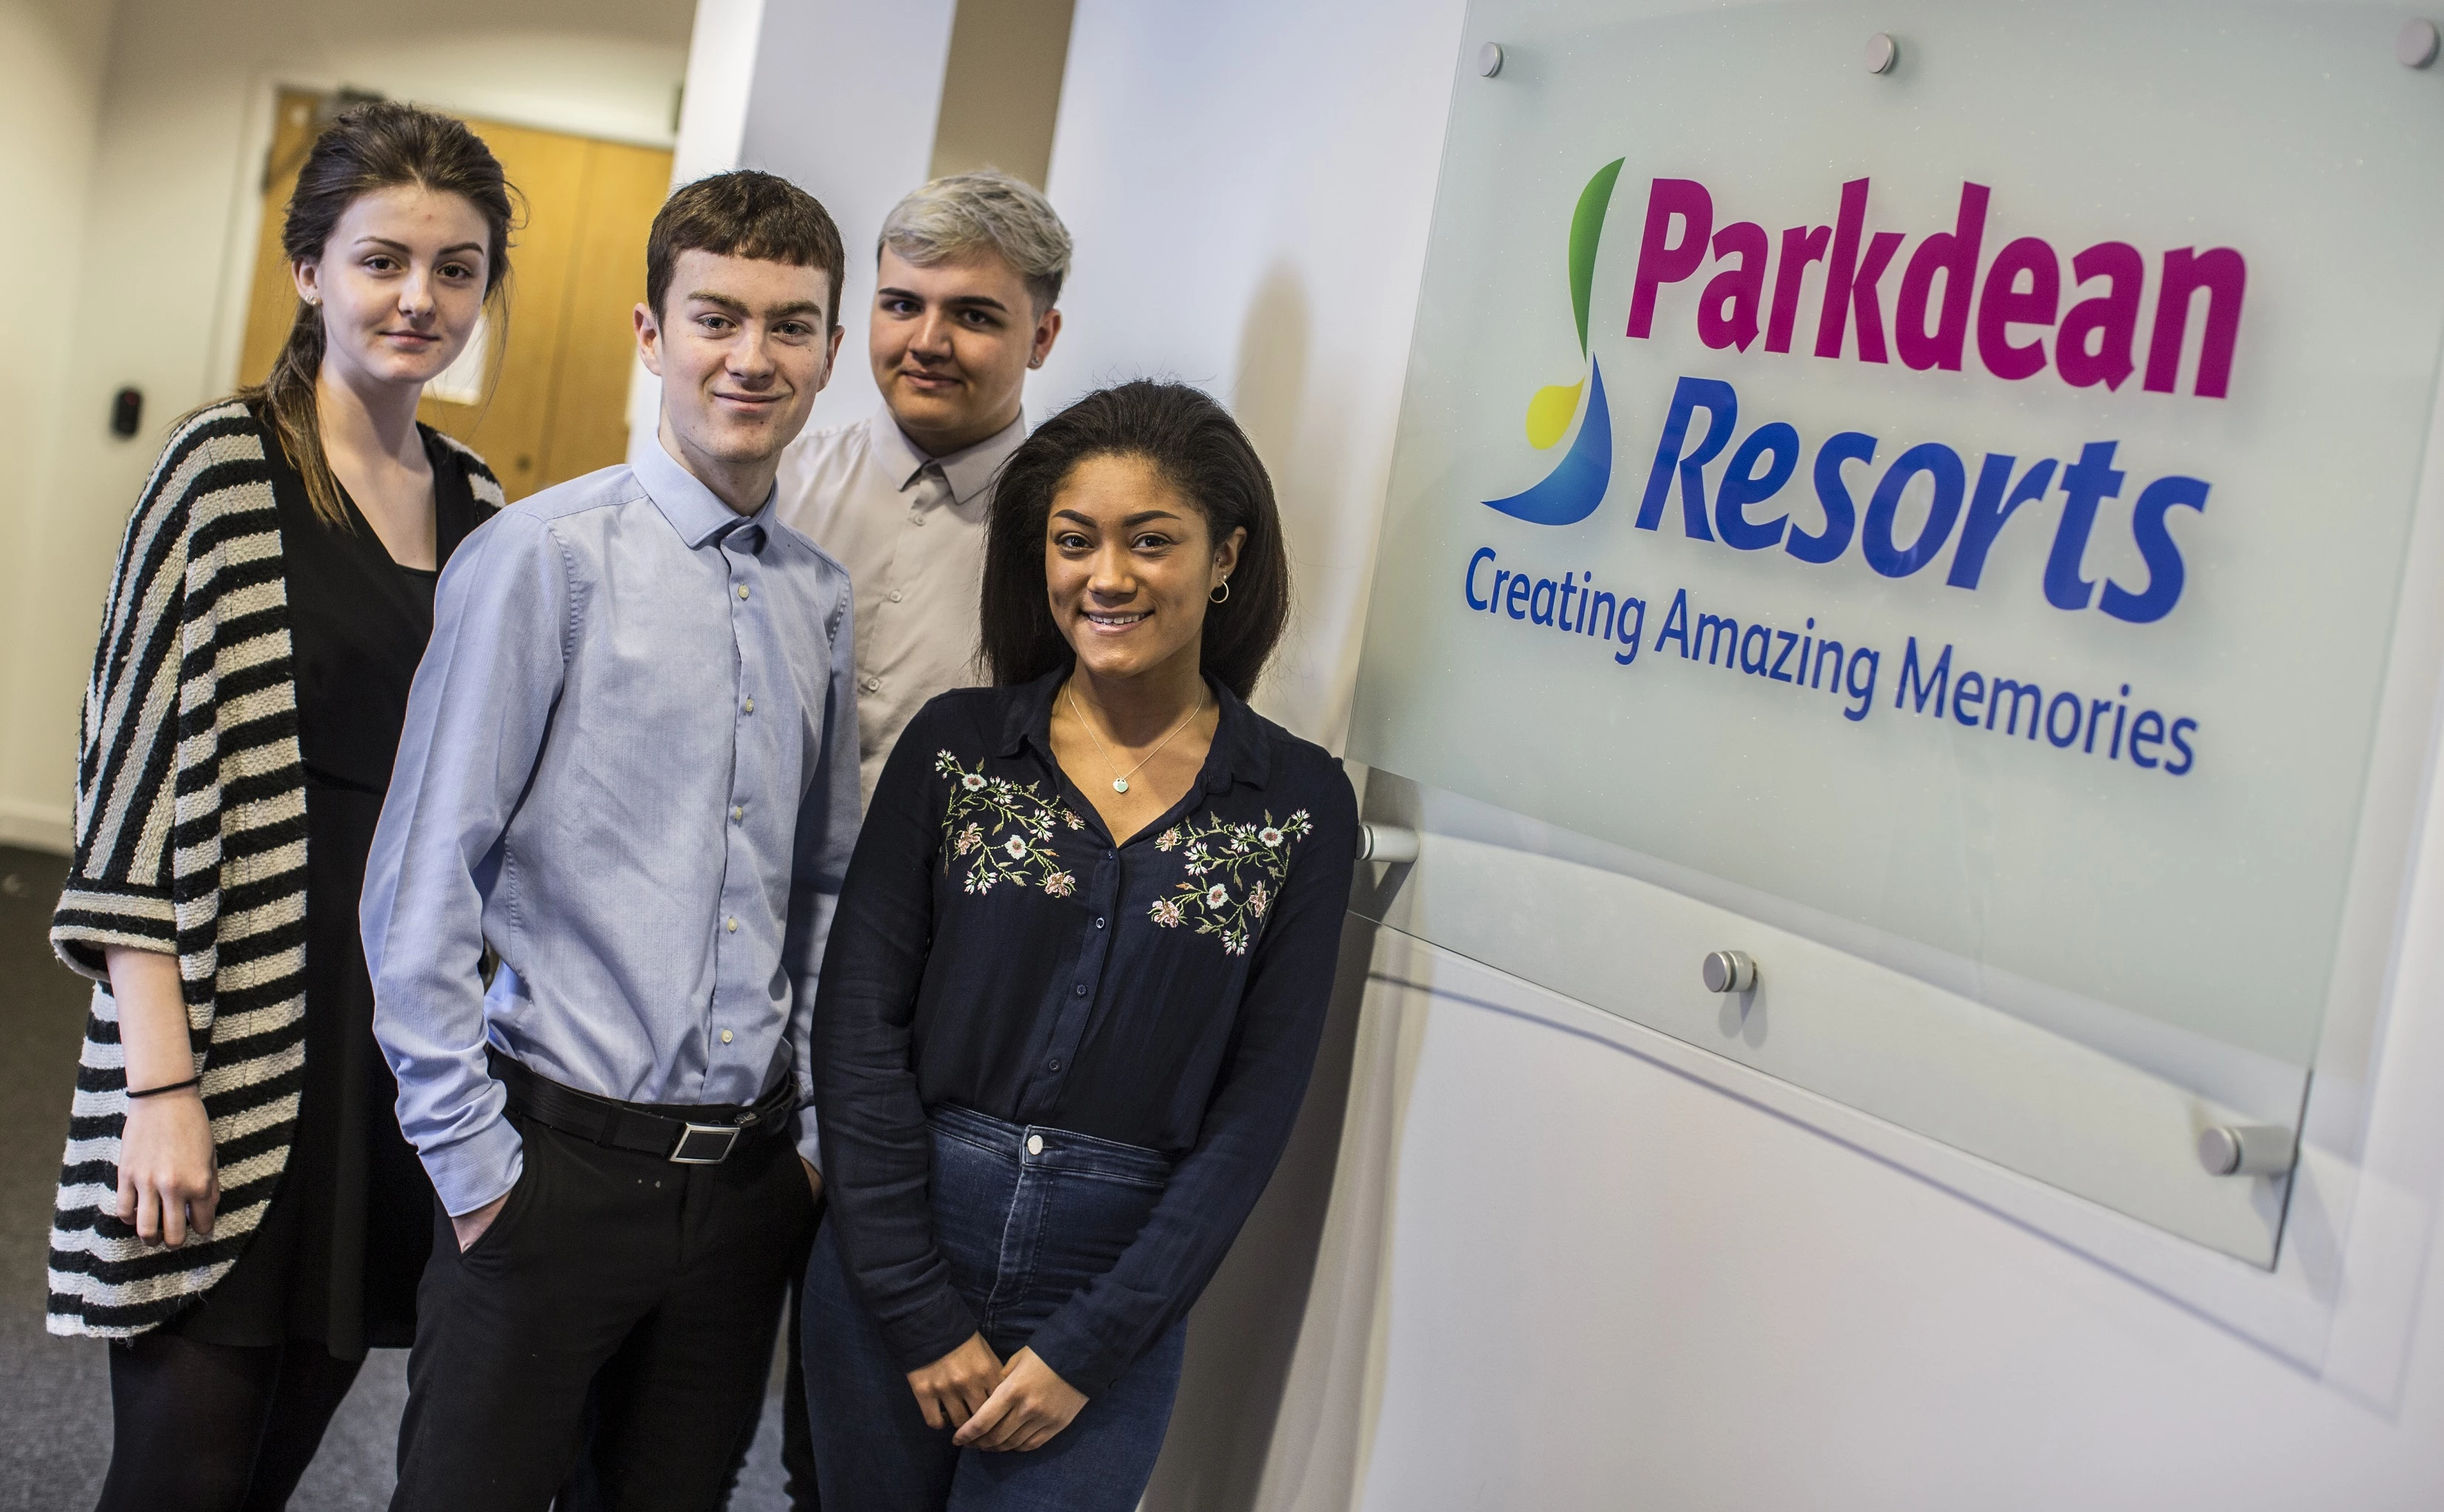 Some of Parkdean Resorts' current apprentices 